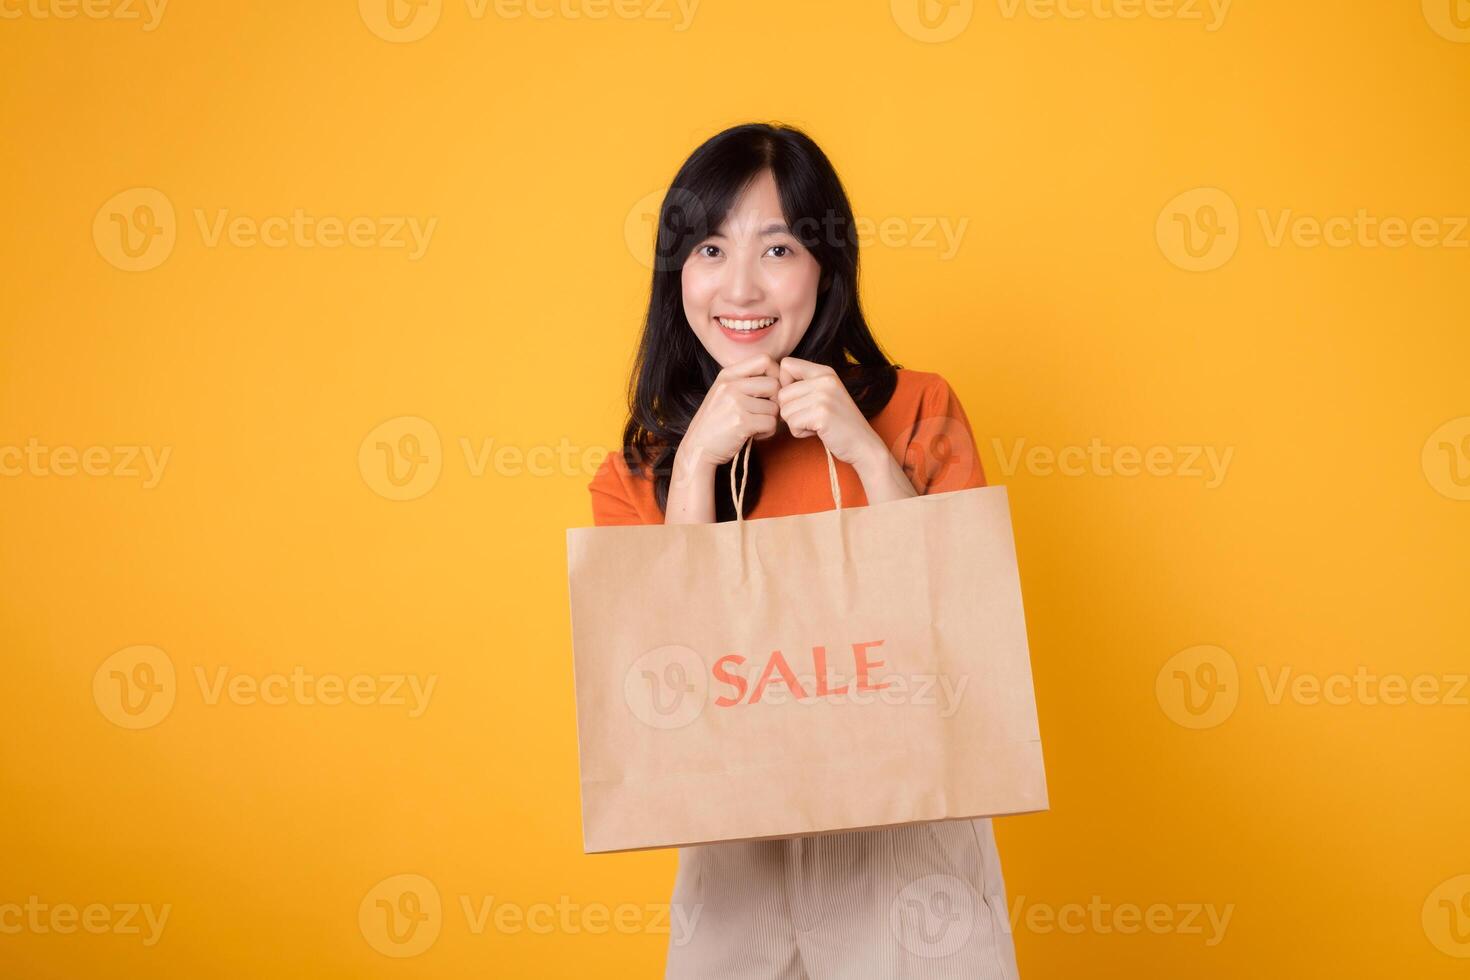 Elevate your shopping experience with the shock of the best deals. Smiling woman reveals her purchases, embodying the joy of finding incredible savings. photo